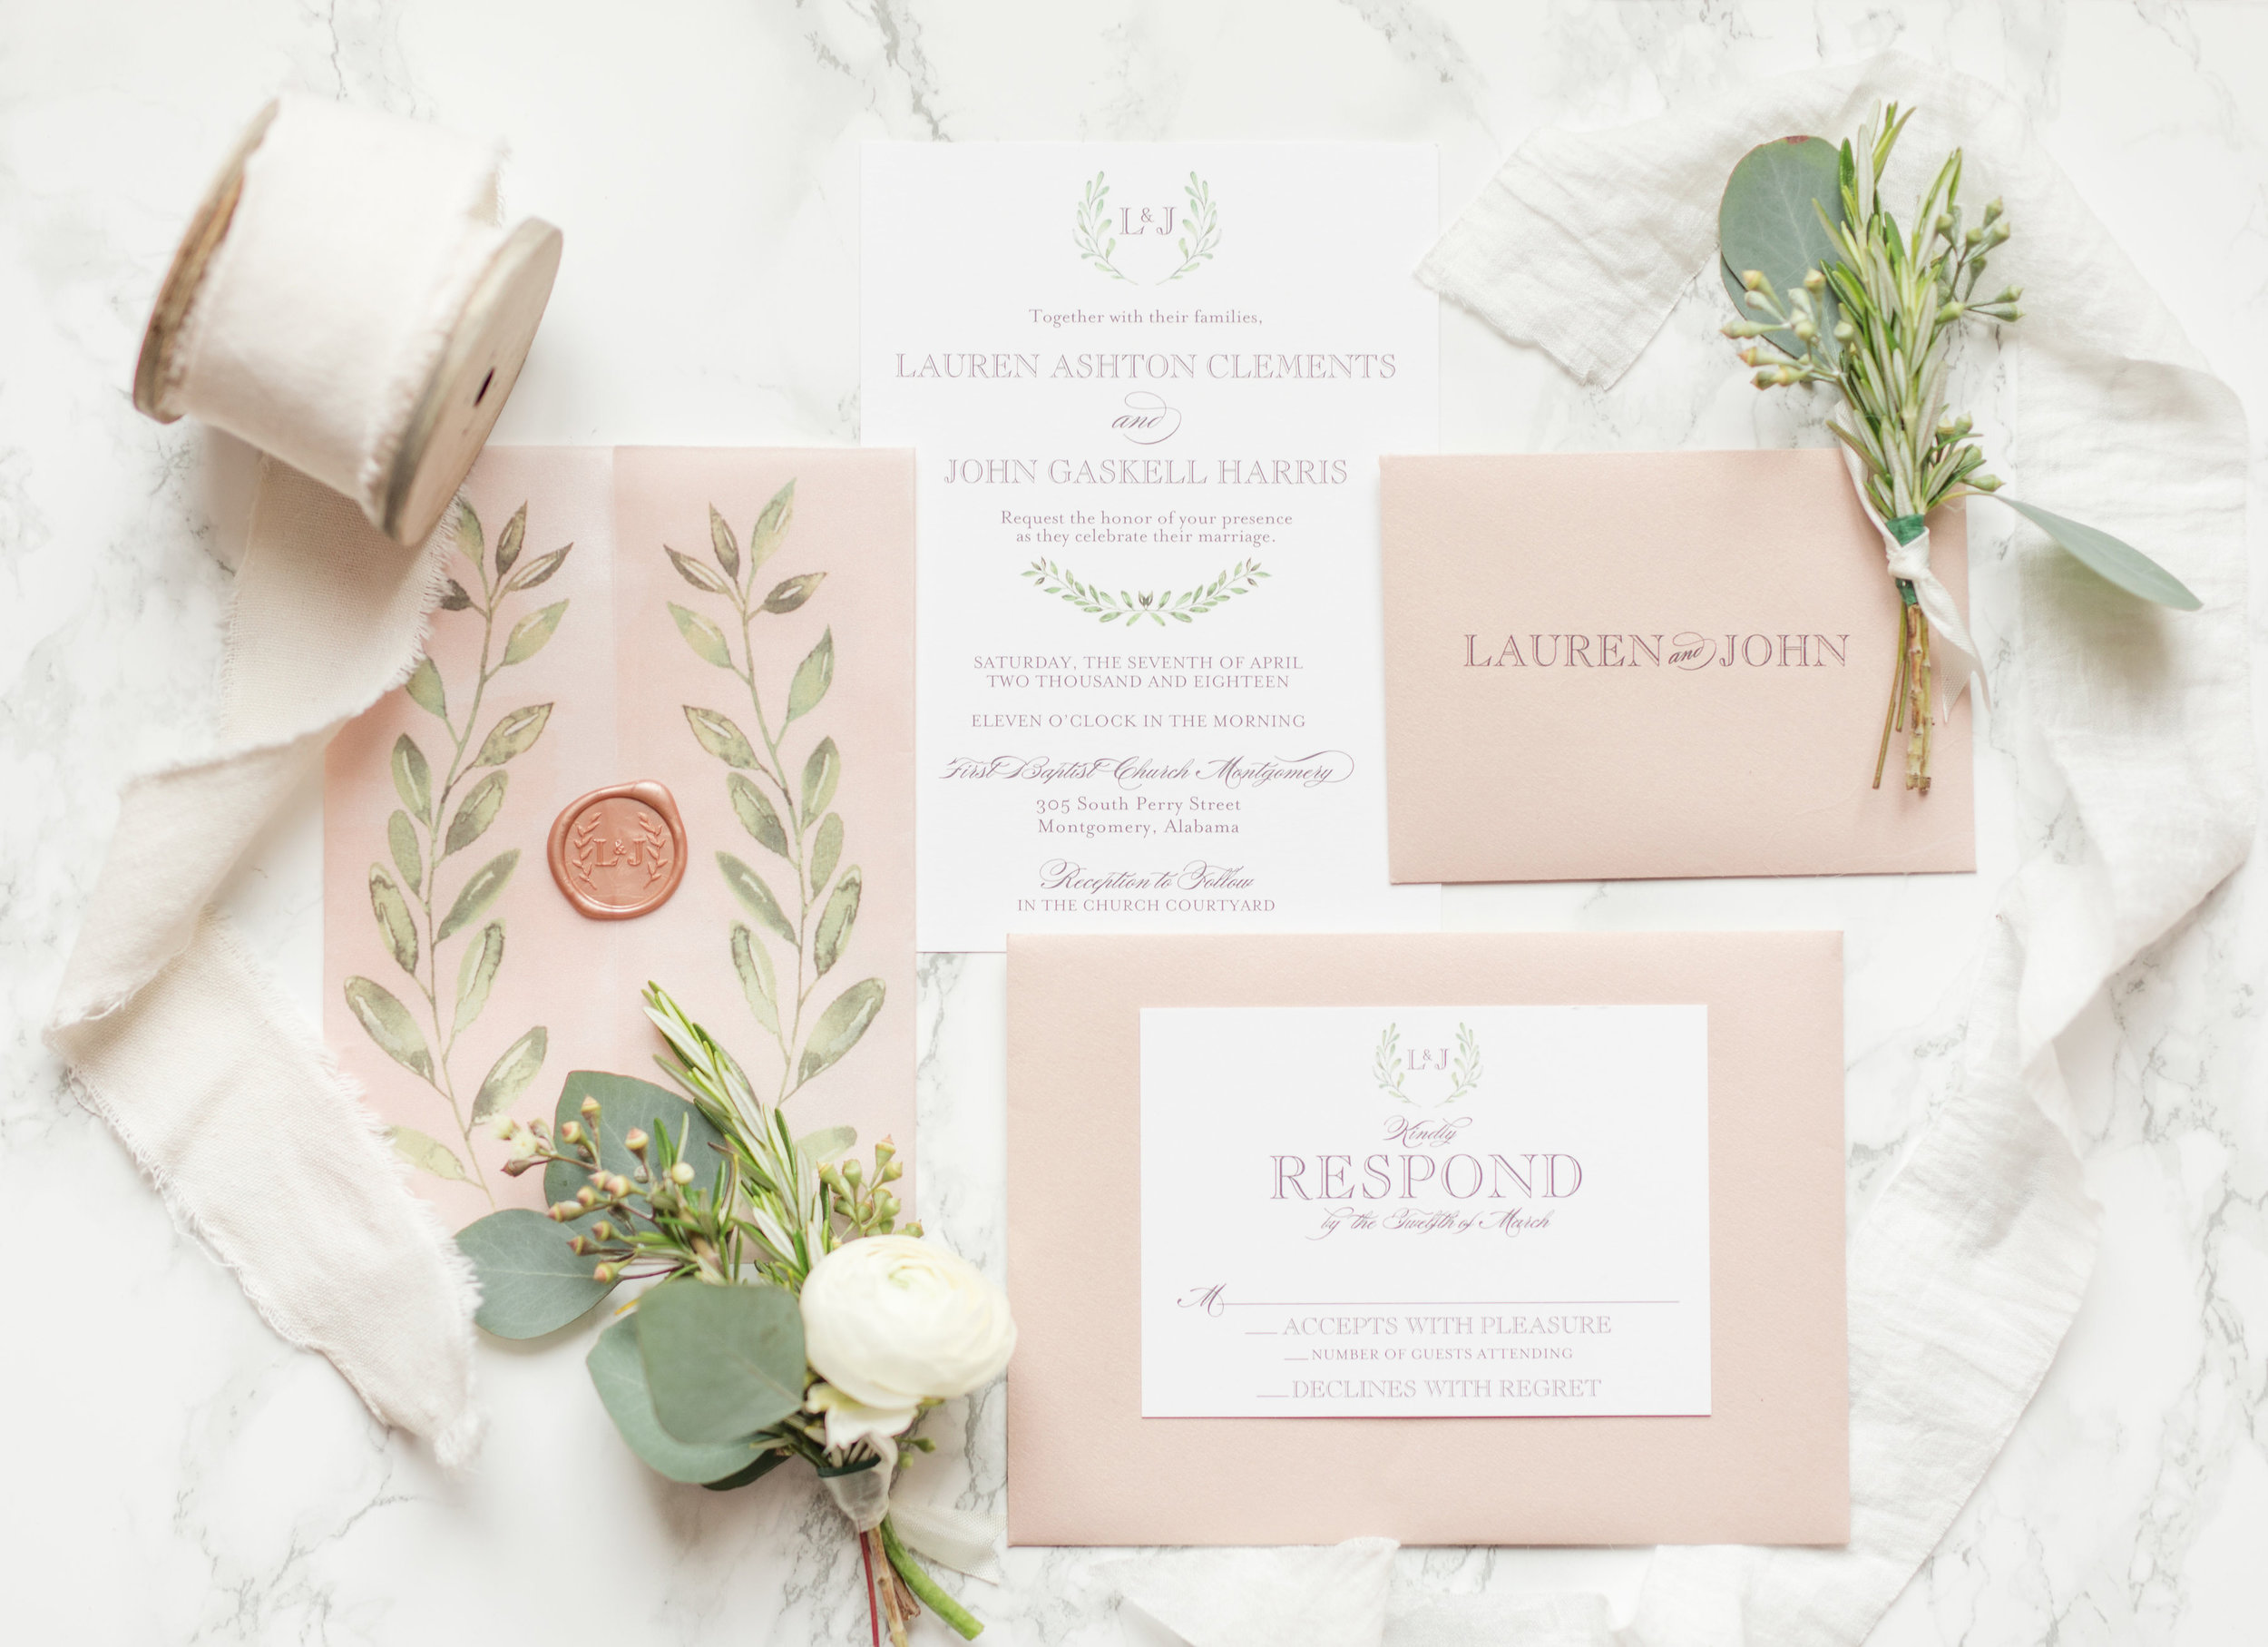  PRO-TIP- if you are looking at using a custom wax seal as an embellishment on your wedding invites or day of paper be sure to to discuss with your stationer sooner rather than later as they do take a little extra time to turn around. If you allow fo